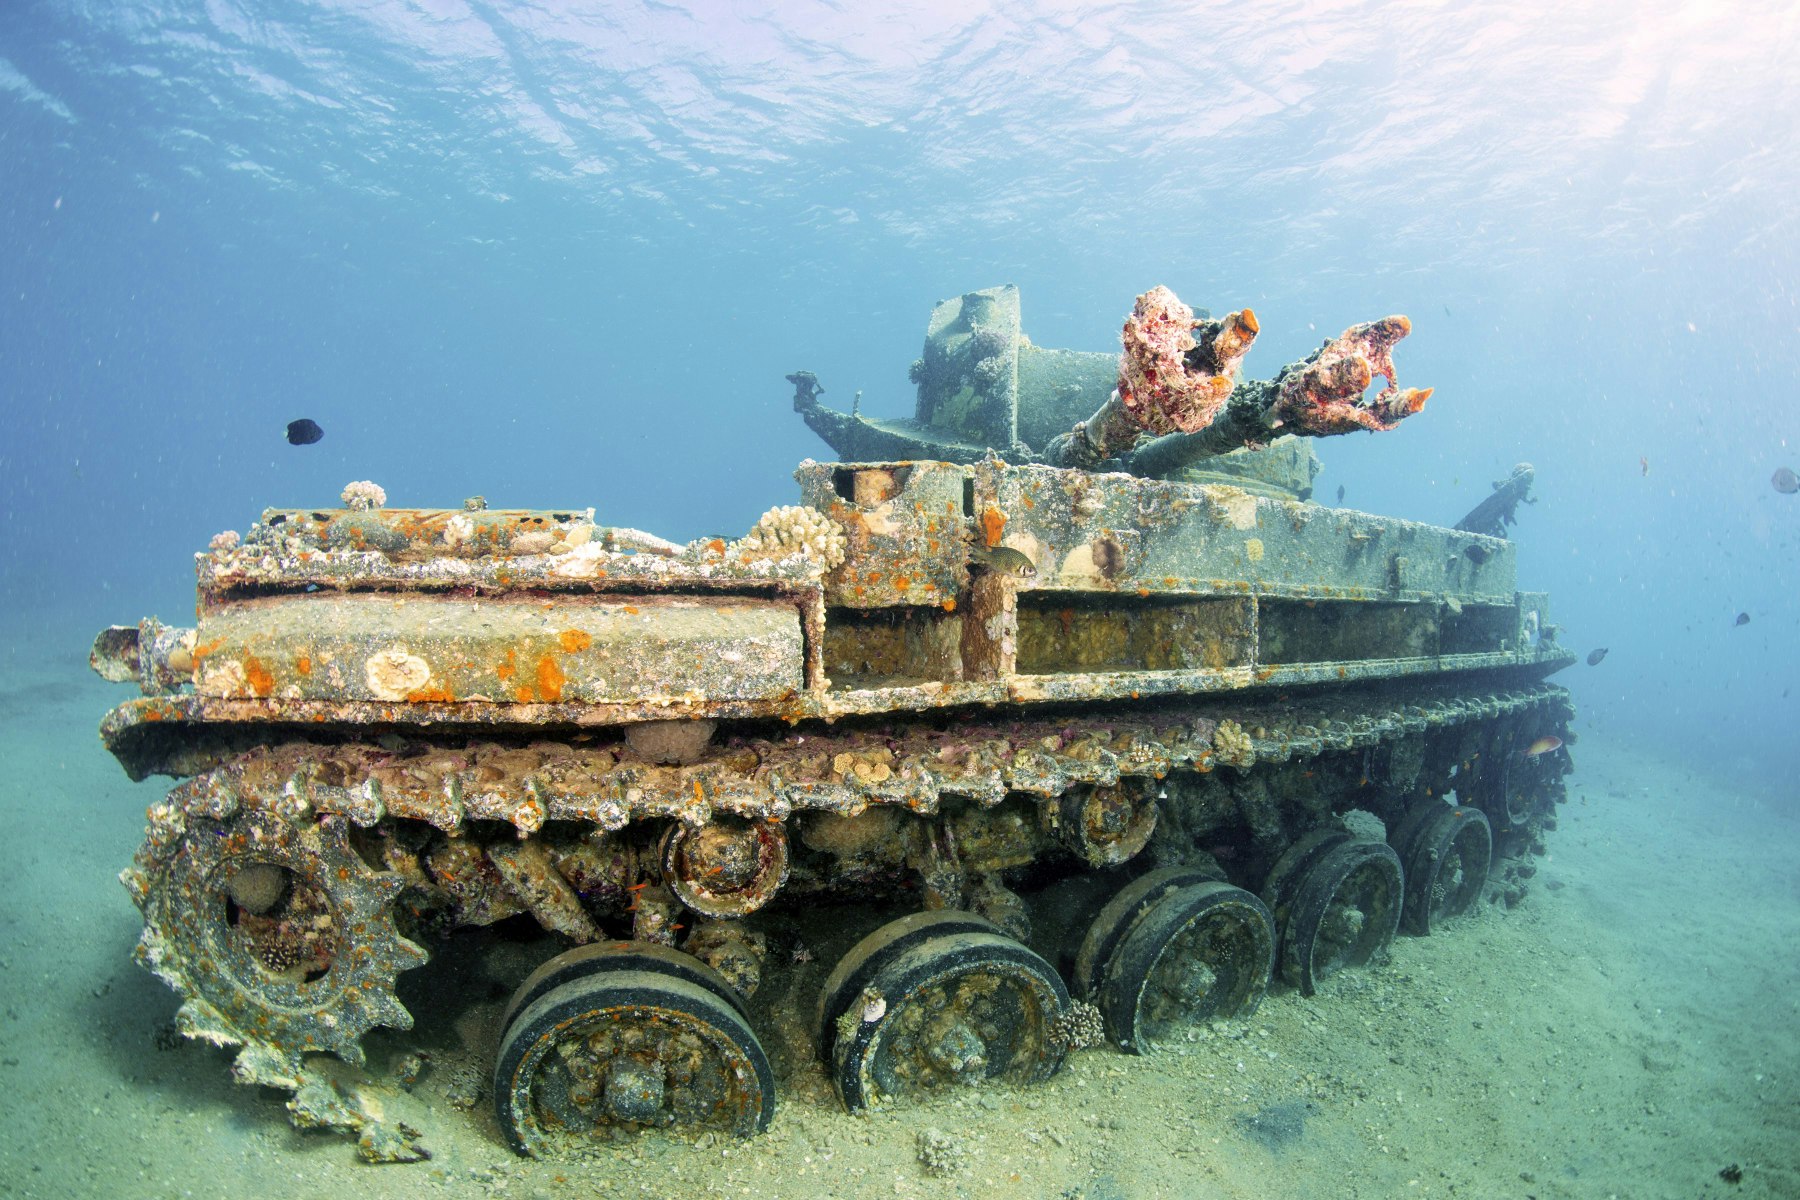 The wreck of a sunken M42 Duster American Tank